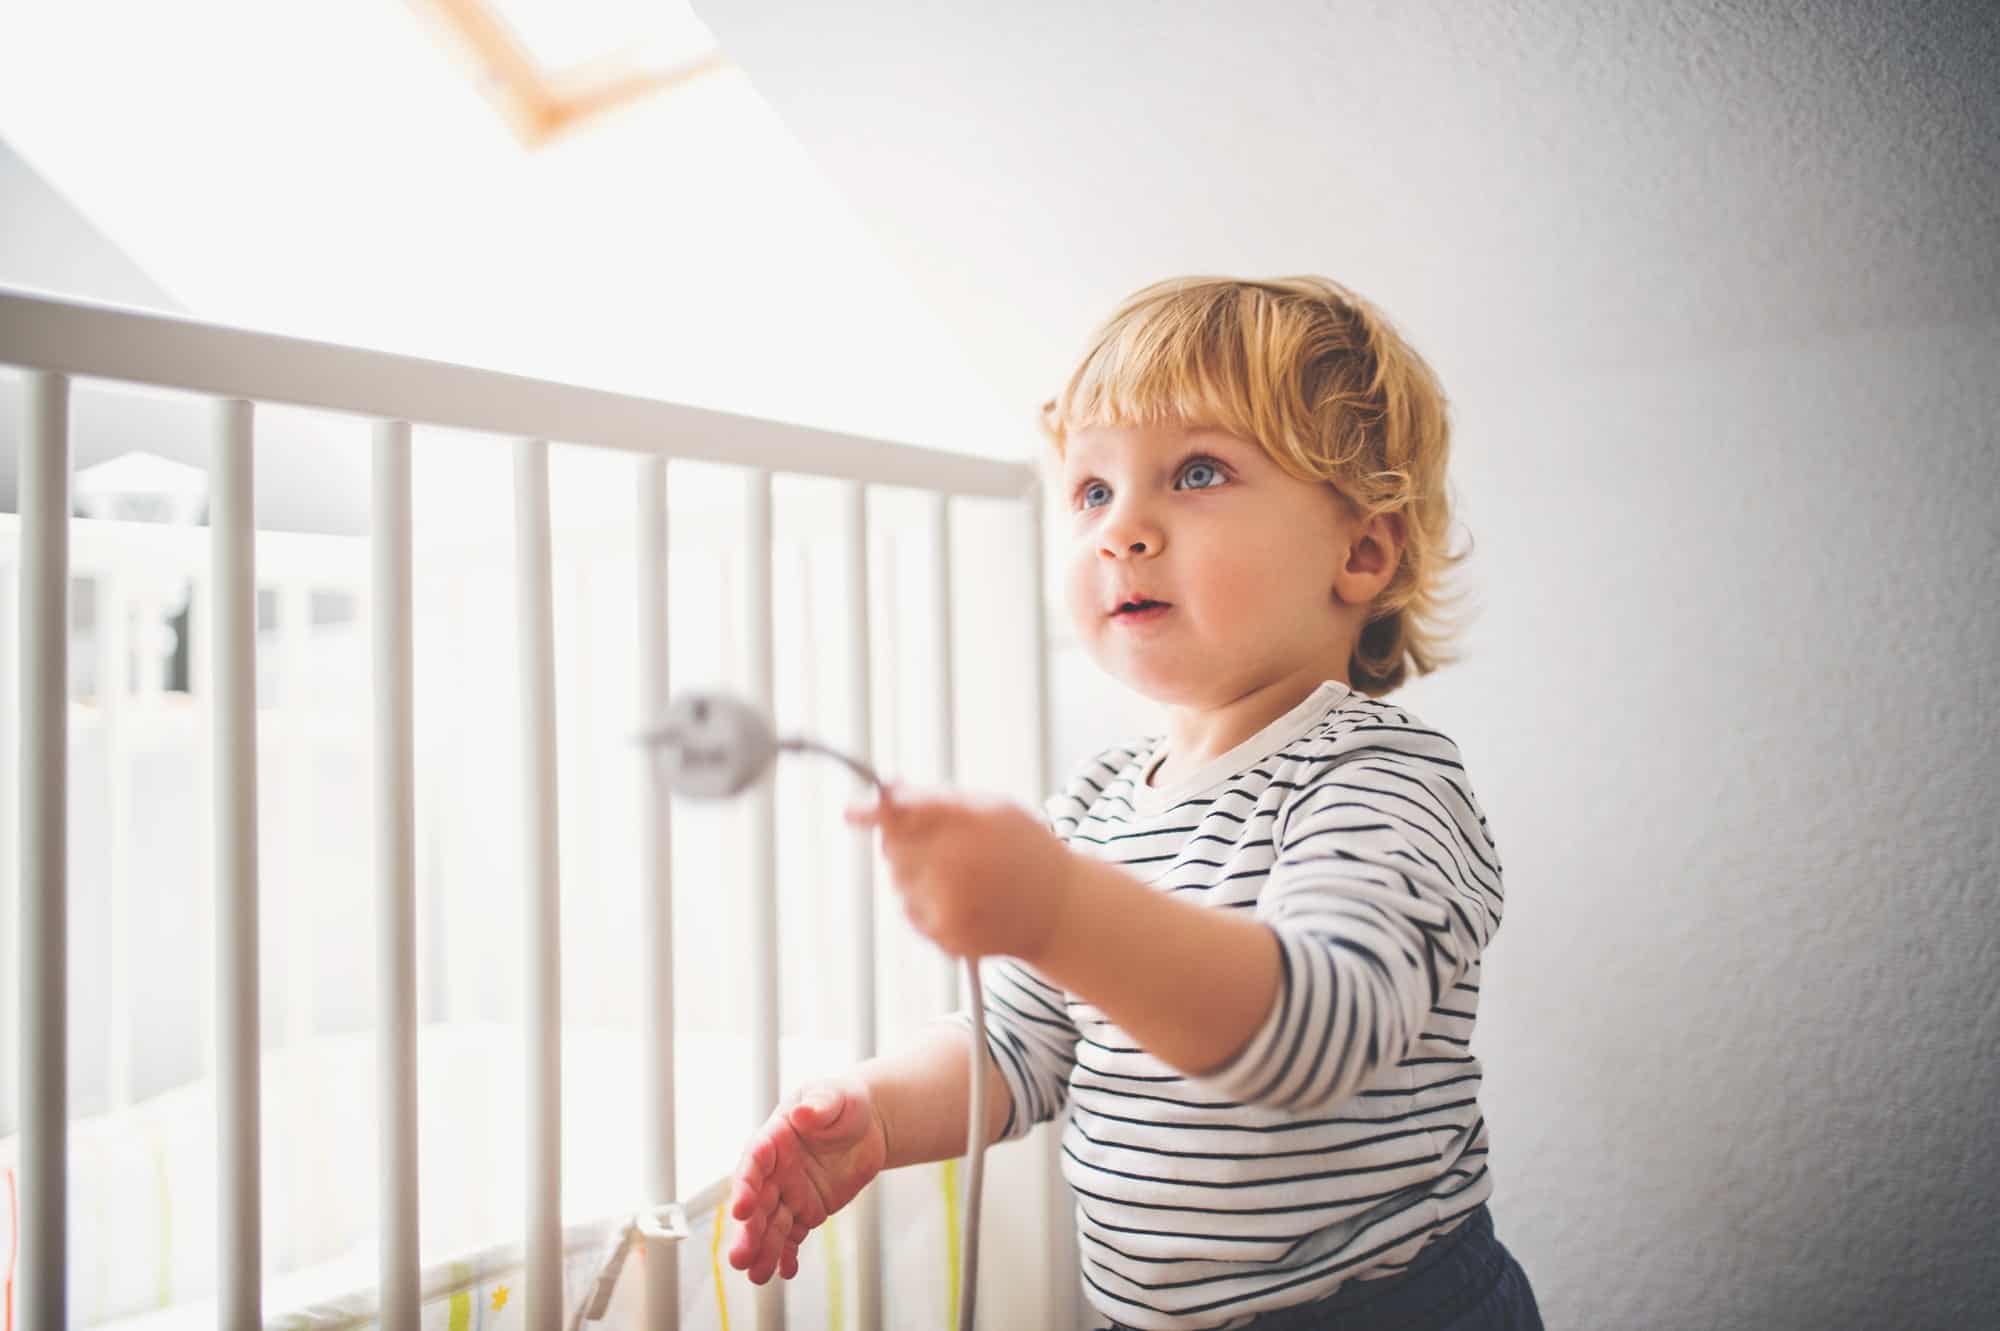 How to ensure Baby Safety in your house to keep your child safe?